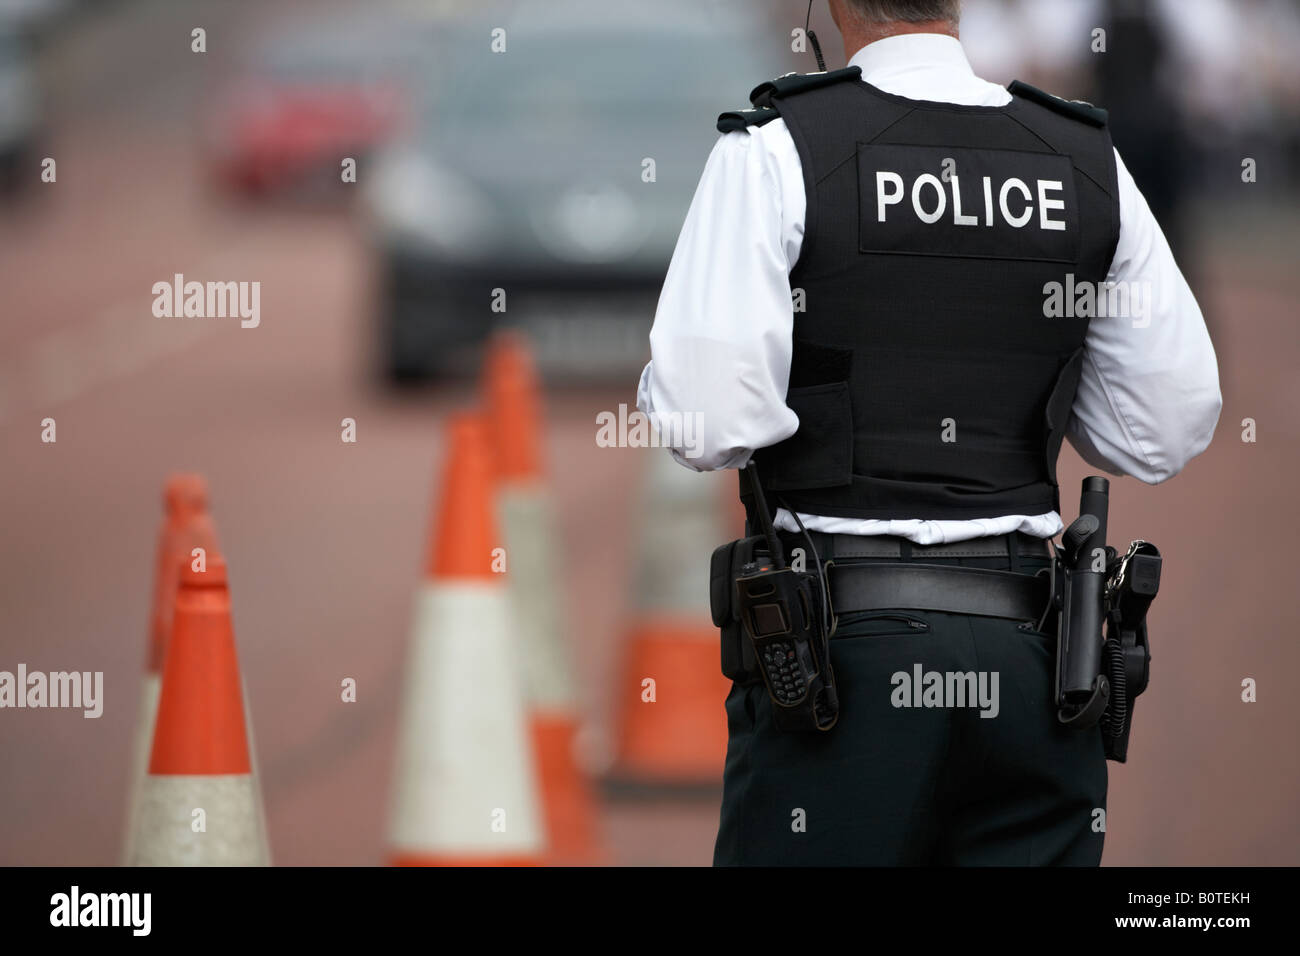 PSNI police service northern ireland officer sergeant standing watching traffic in coned off roadside area Stock Photo